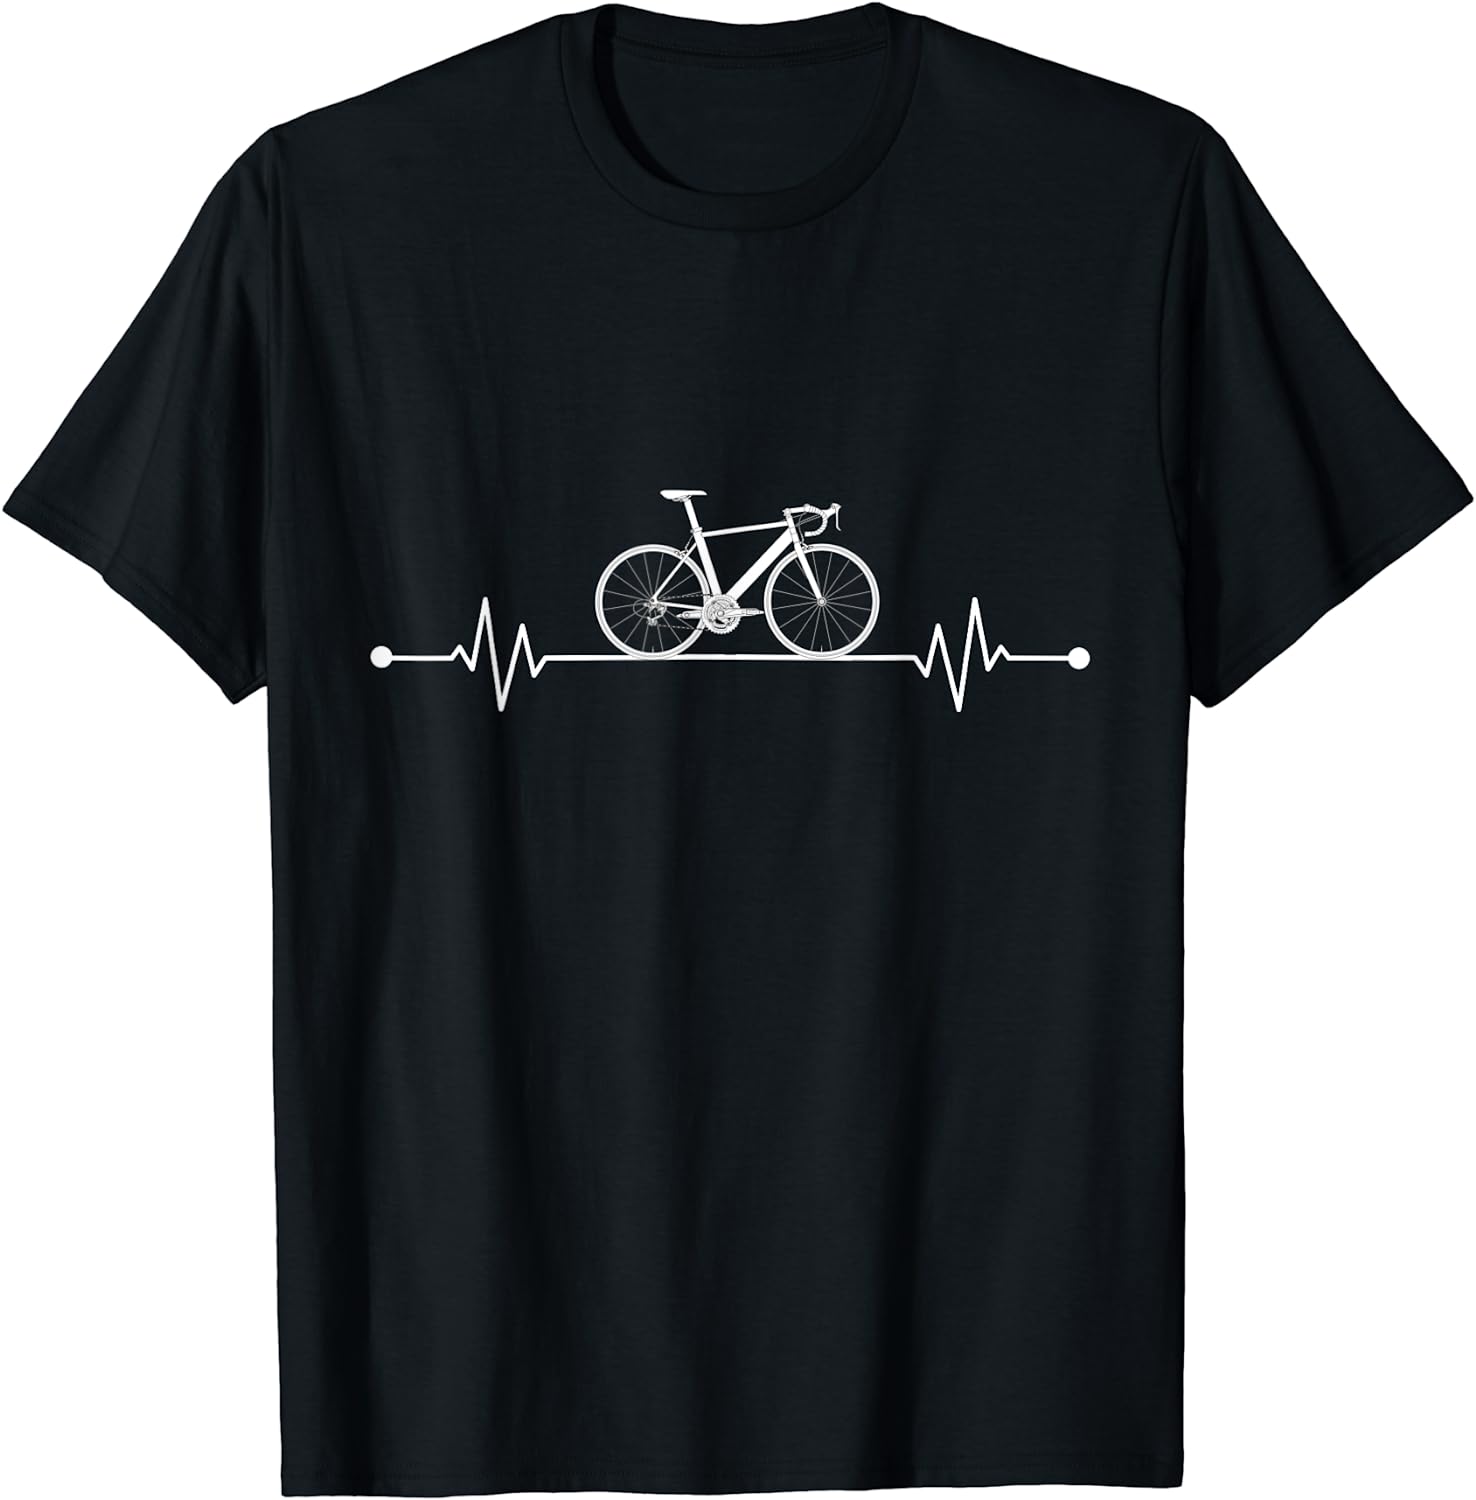 Funny Cycling Heartbeat - Bicycle Love Biking Cycling Lover T-Shirt Best Price